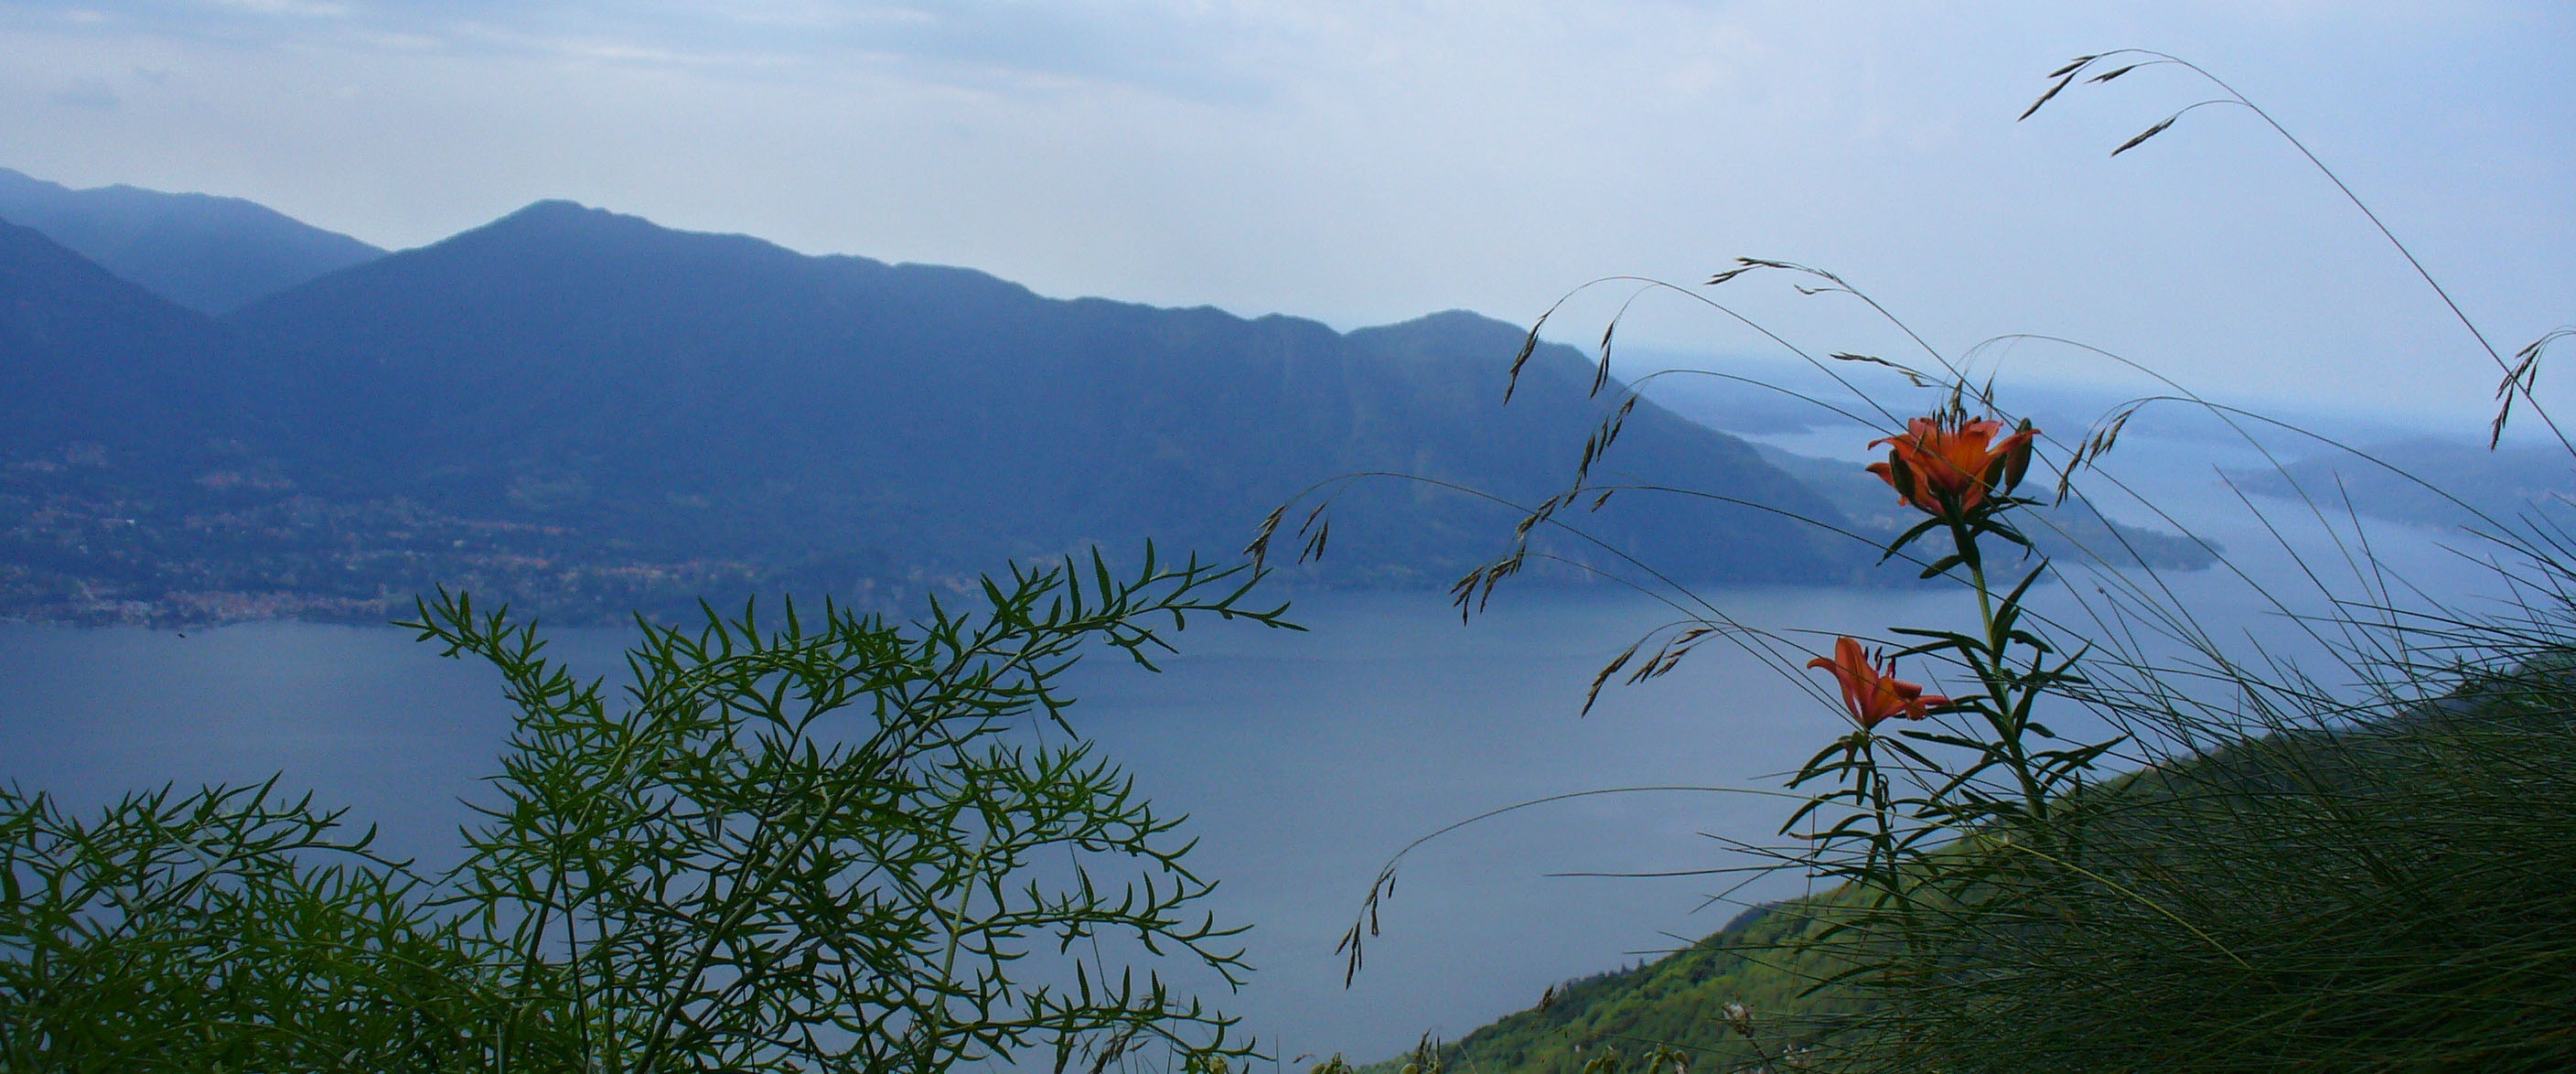 Lago Maggiore - one of the best studied European lakes